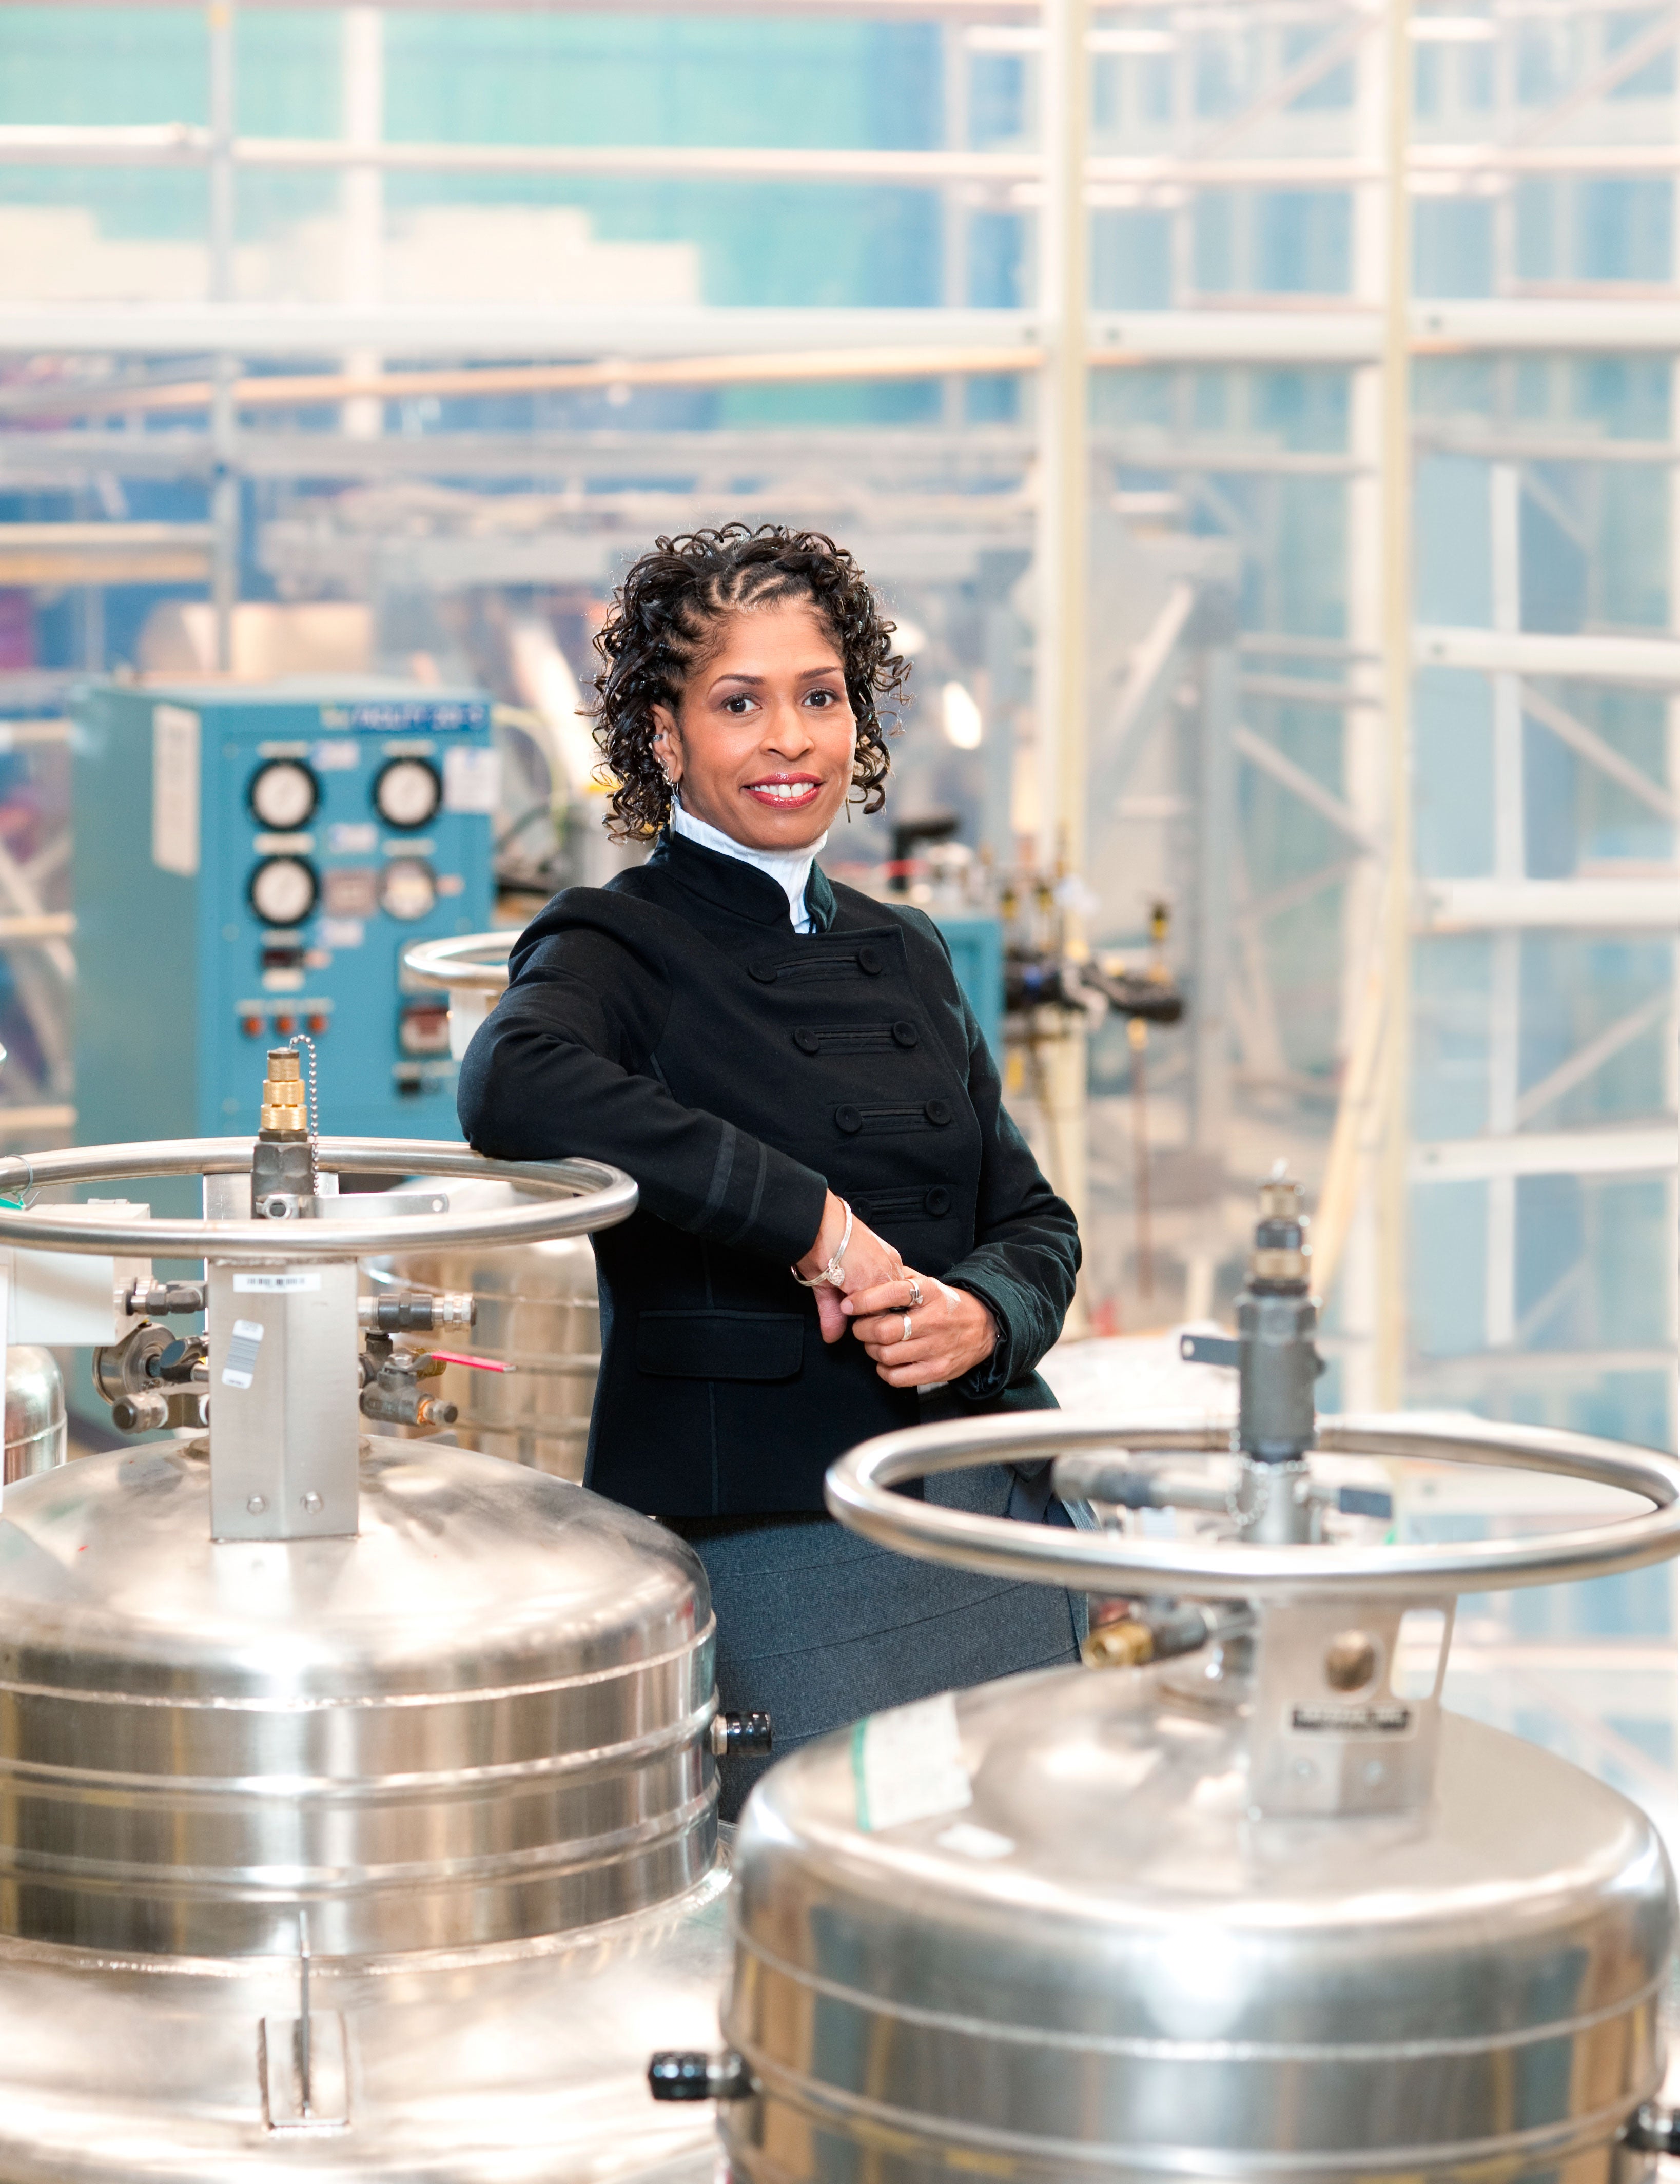 15 Black Women Who Are Paving The Way In STEM And Breaking Barriers
